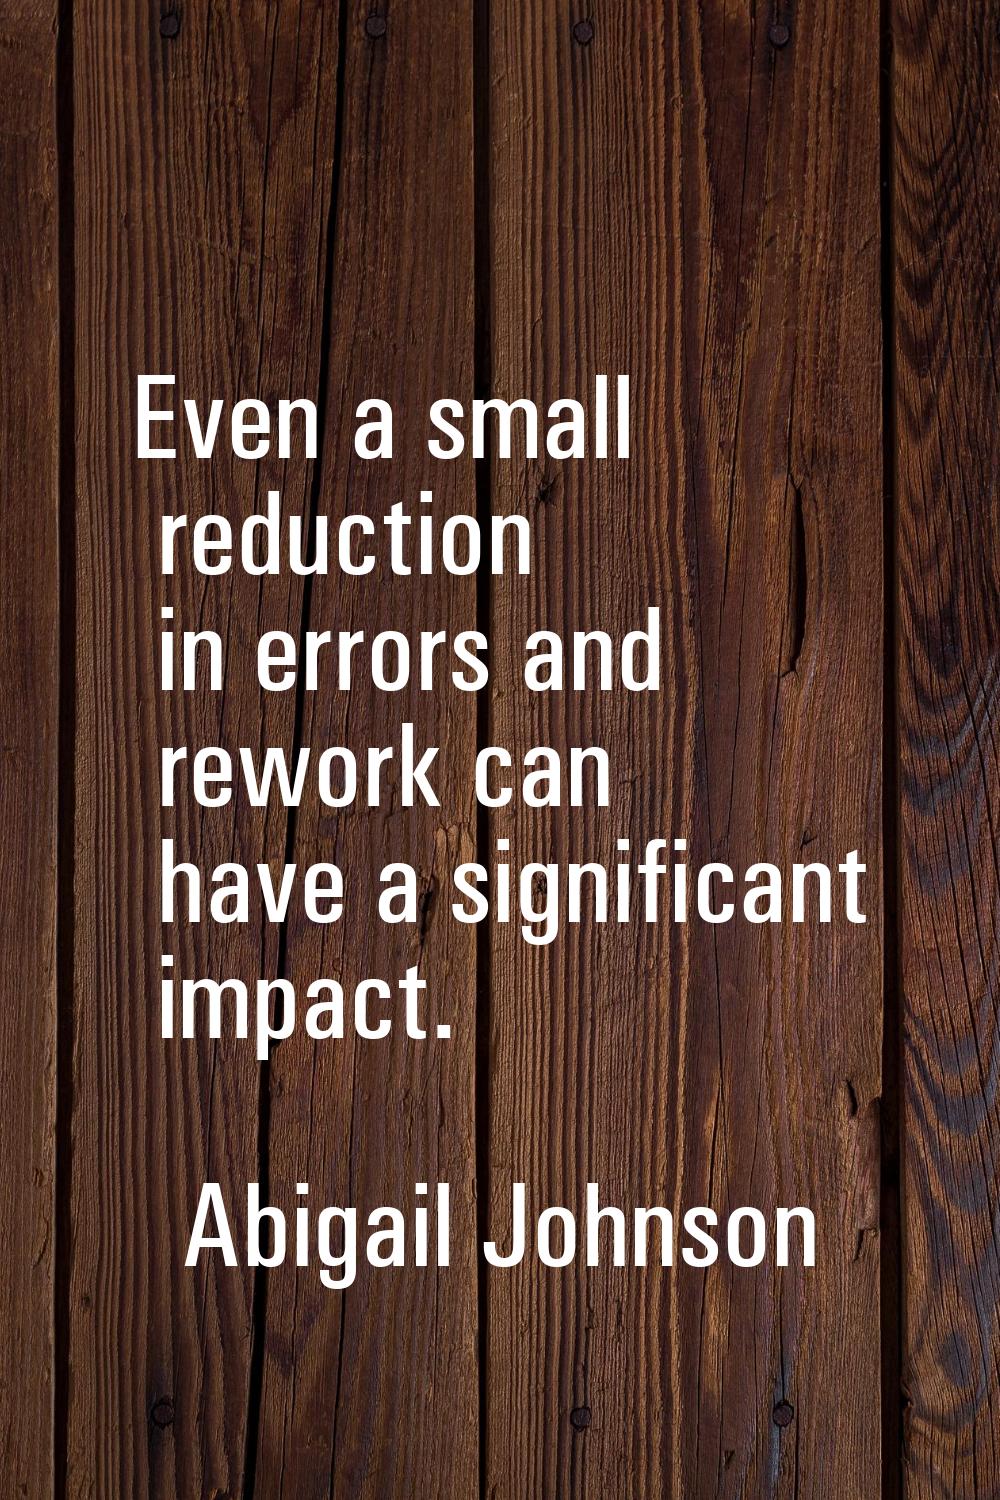 Even a small reduction in errors and rework can have a significant impact.